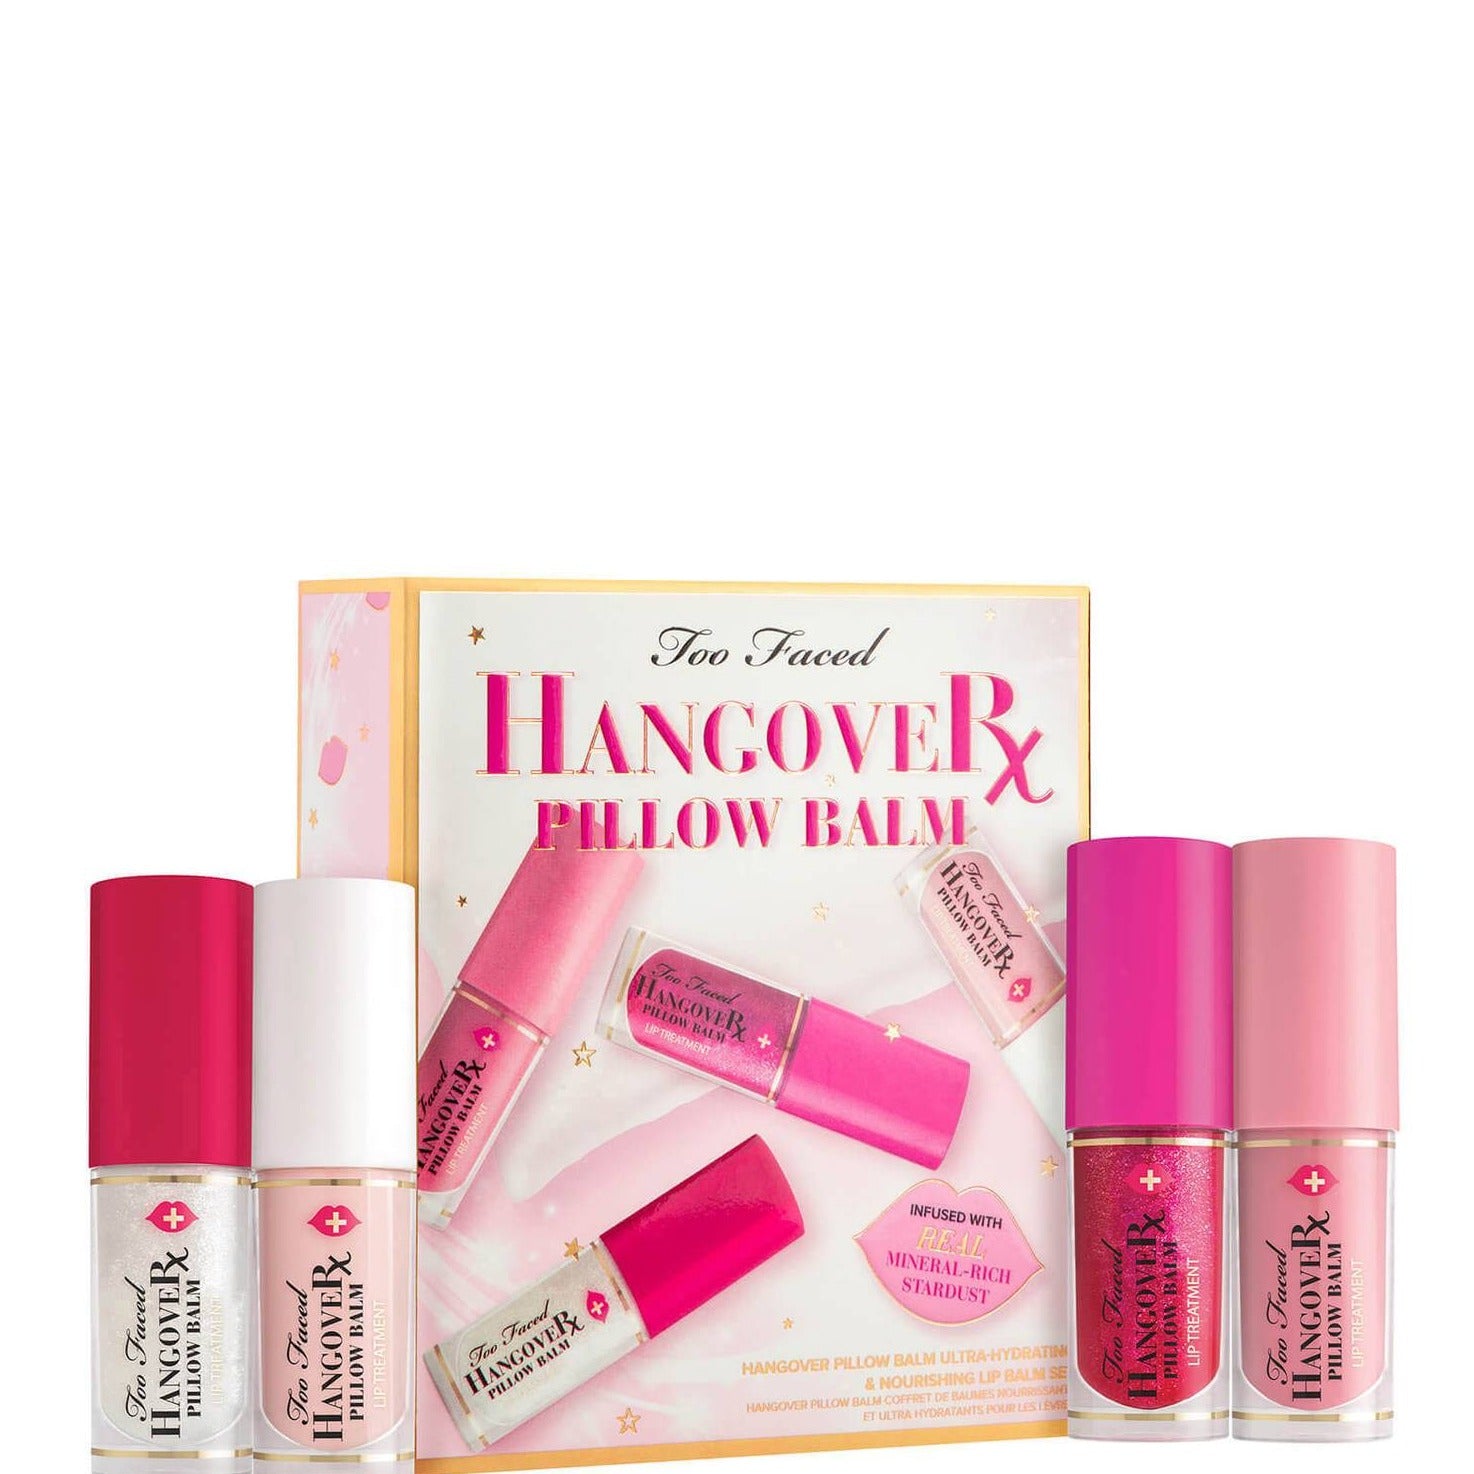 The Too Faced Hangover RX Pillow Balm Ultra-Hydrating and Nourishing Lip Treatment Set hydrates and replenishes your pout with 4 Super size deluxe size exclusive shades and scents that will take you into the holidays and beyond year around.  